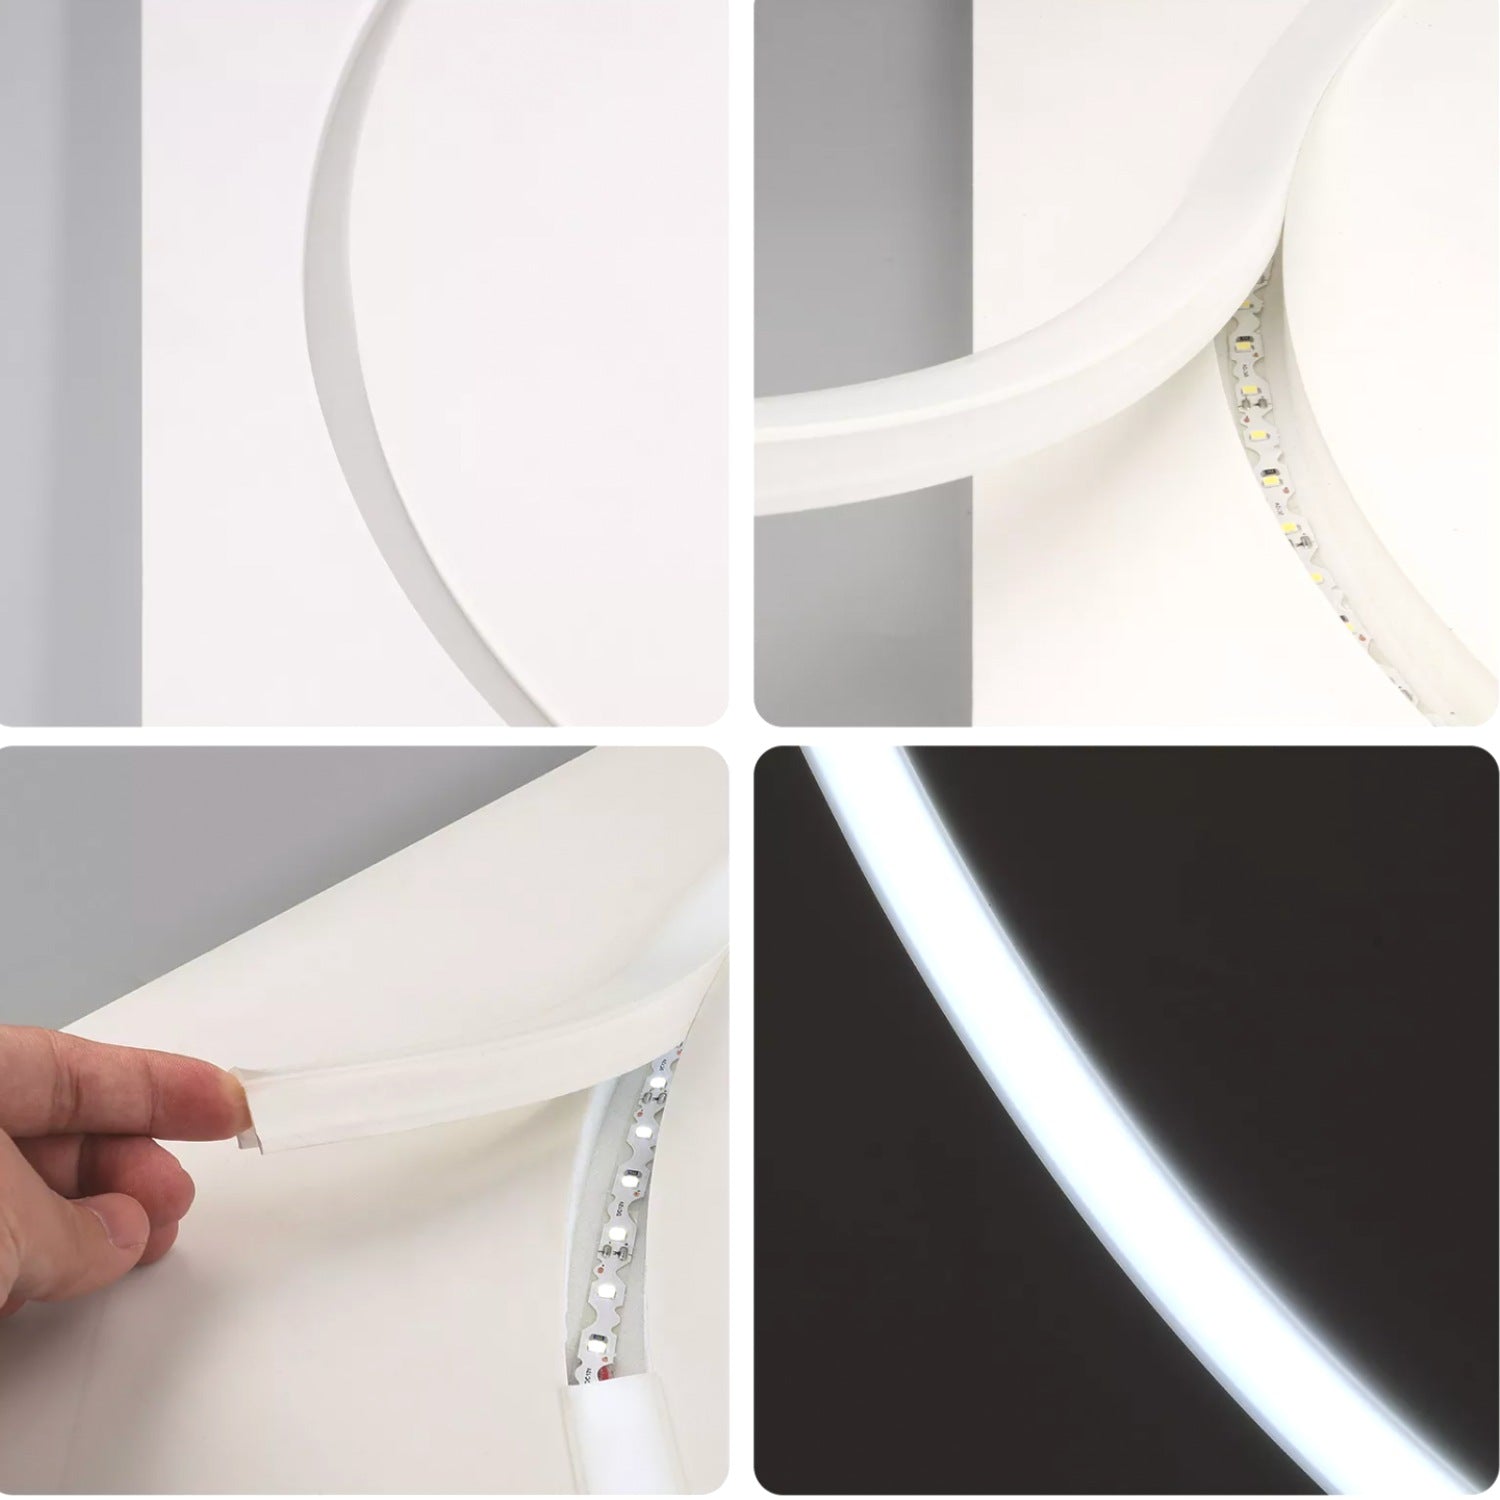 LED Neon Flex & LED Strip Silicone Cover Curve Body Flexible Bendable 15x20mm - ATOM LED